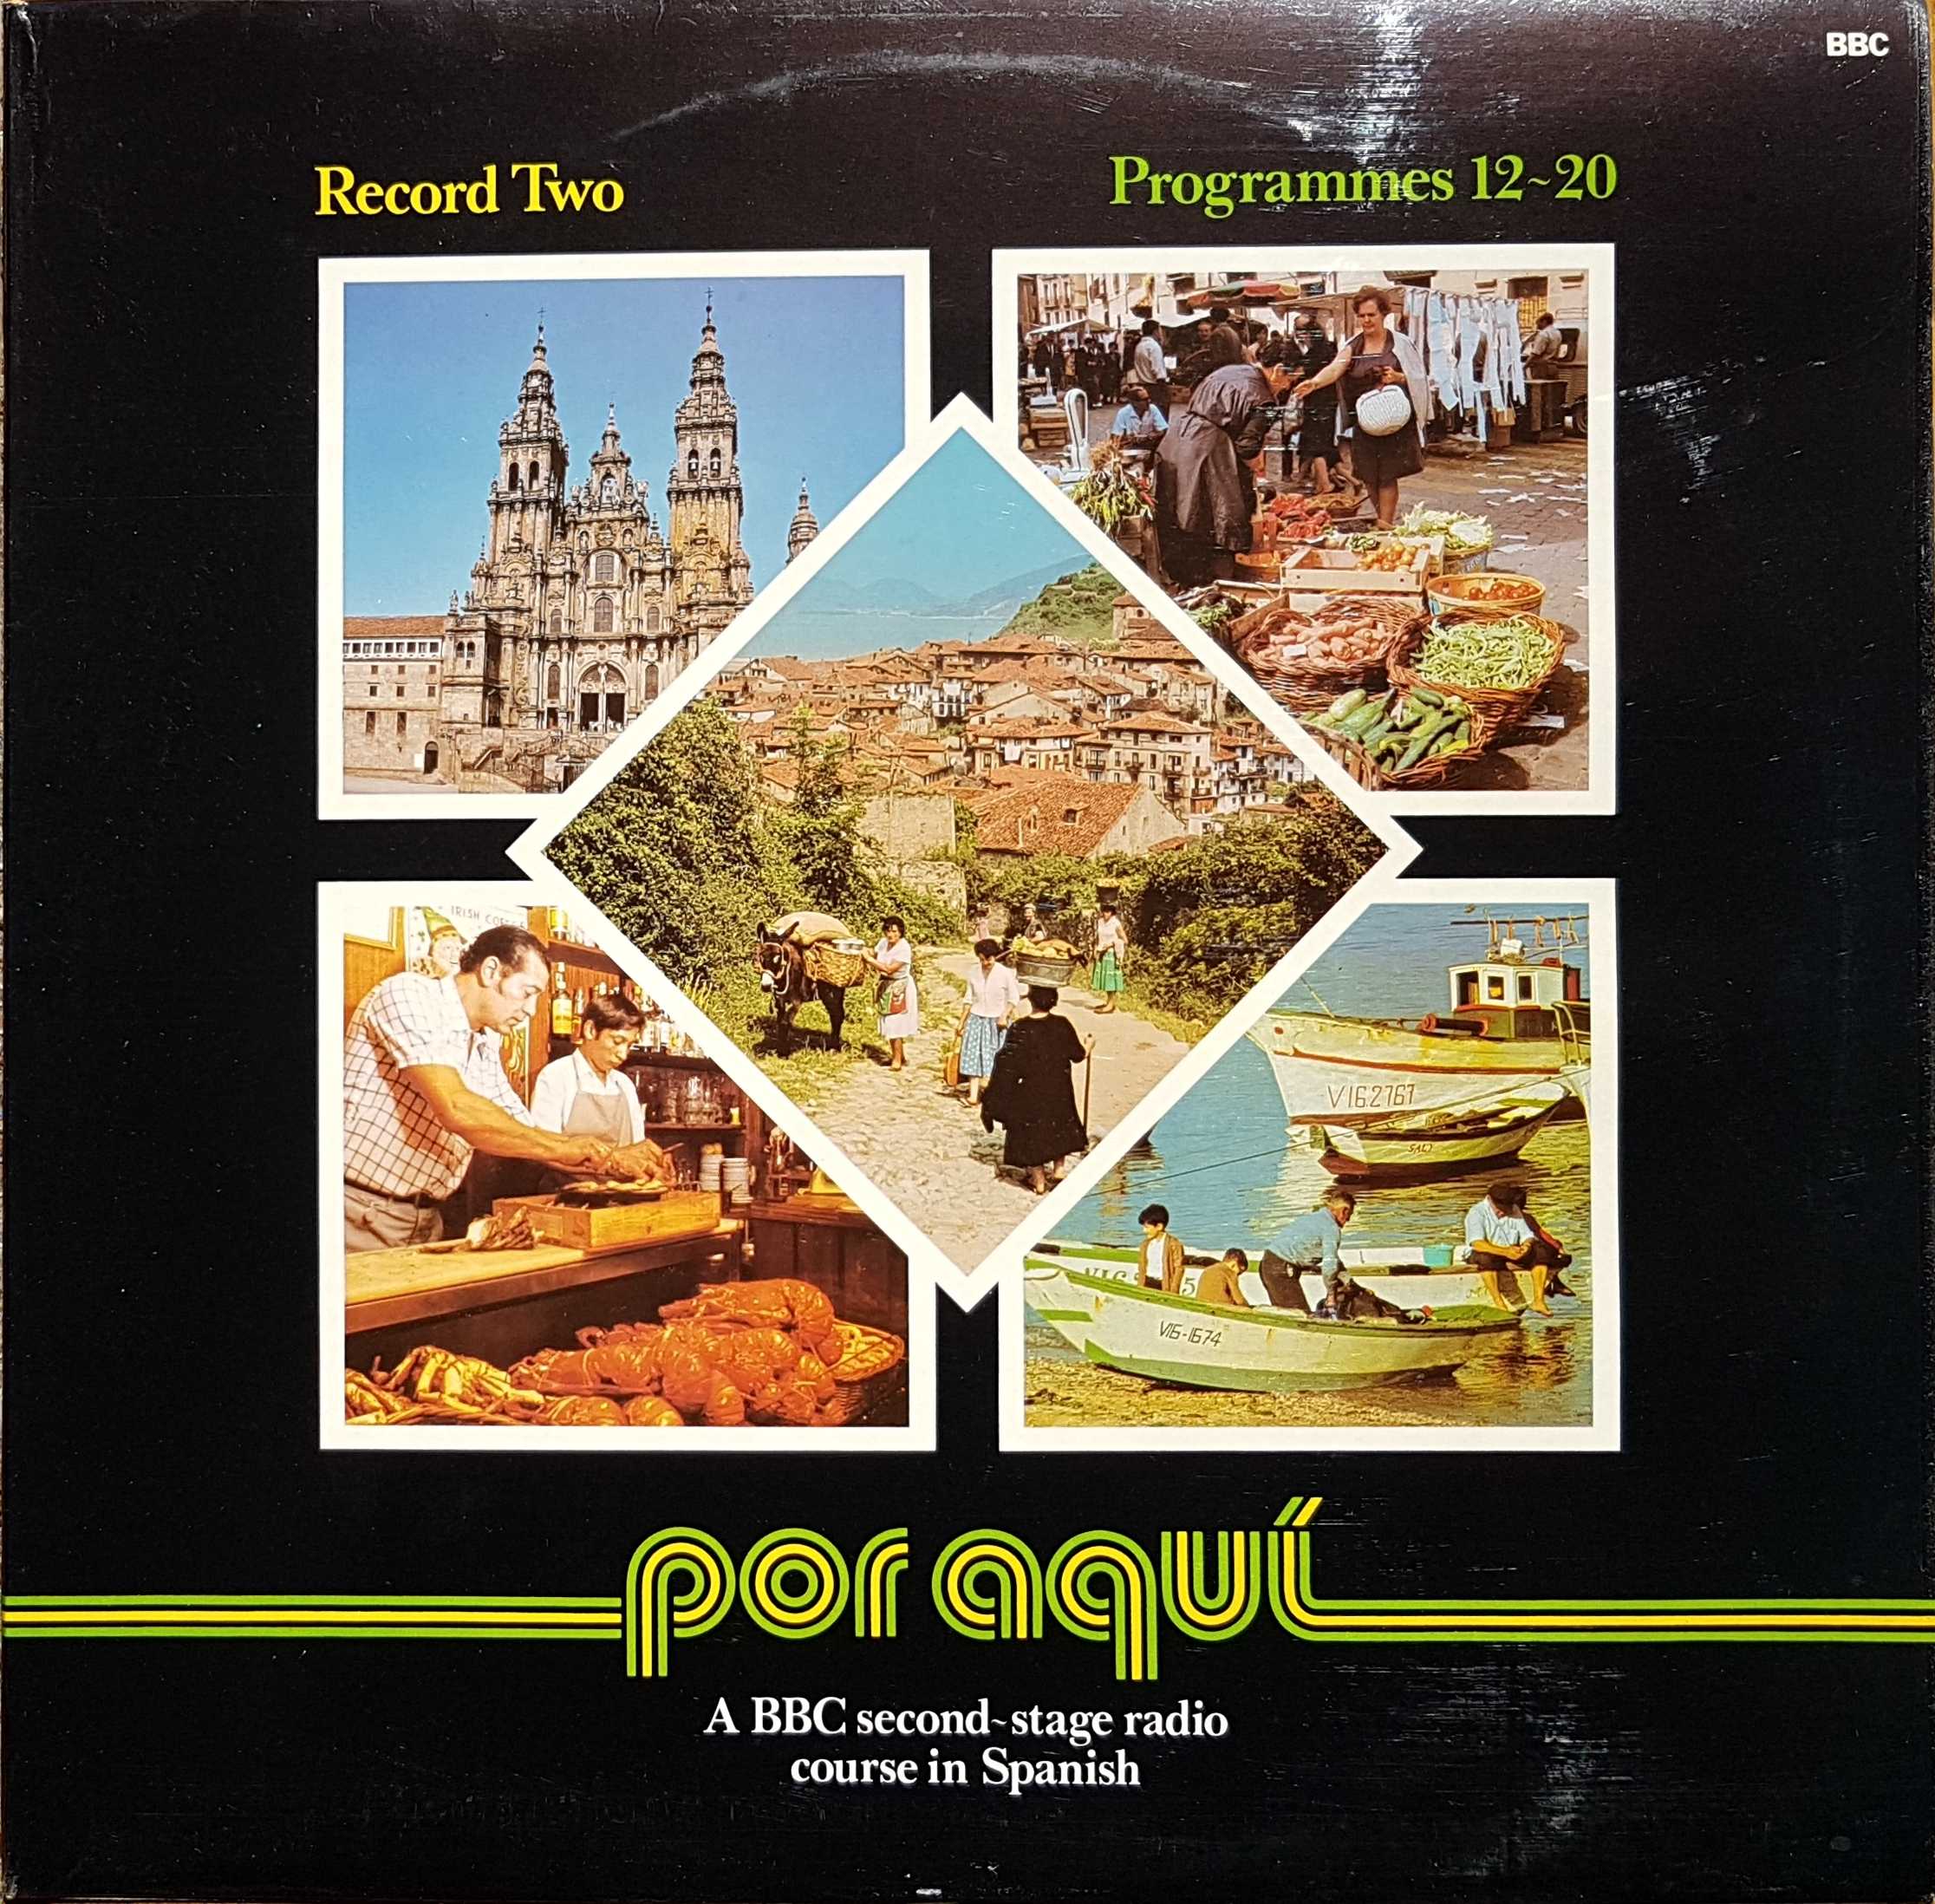 Picture of OP 239 Por aqui - A BBC second-stage radio course in Spanish - Record 2 - Programmes 12 - 20 by artist Various from the BBC albums - Records and Tapes library